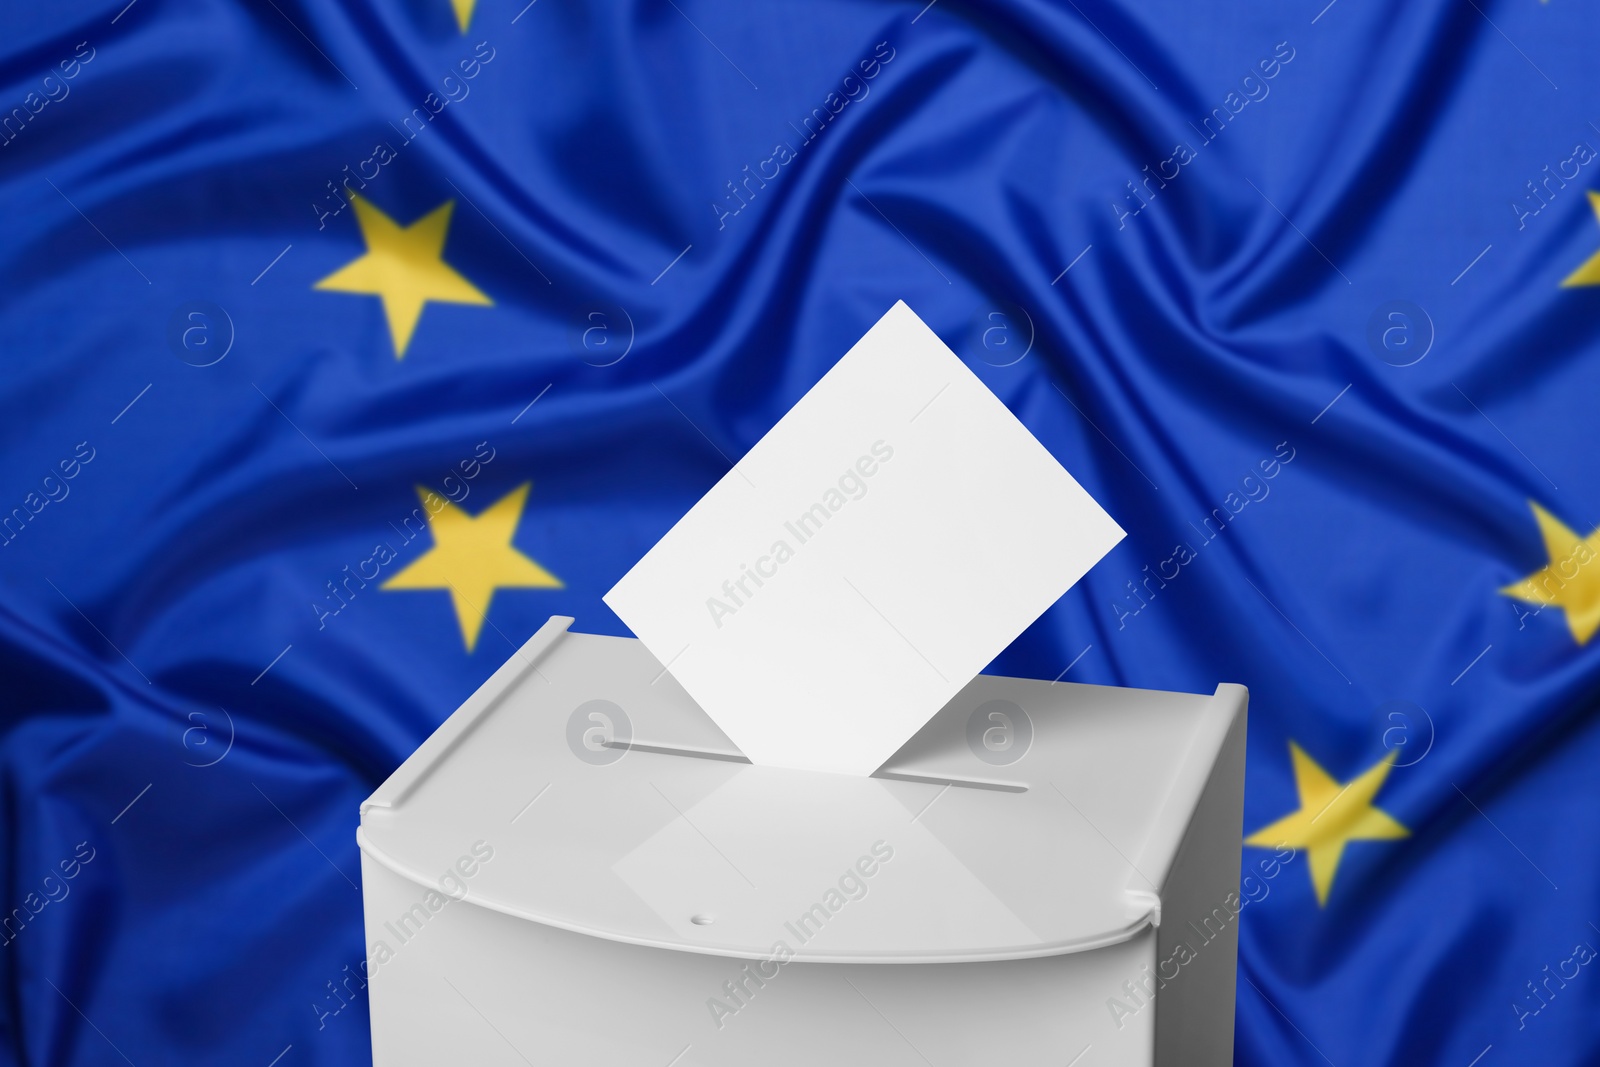 Image of Ballot box with vote against flag of Europe